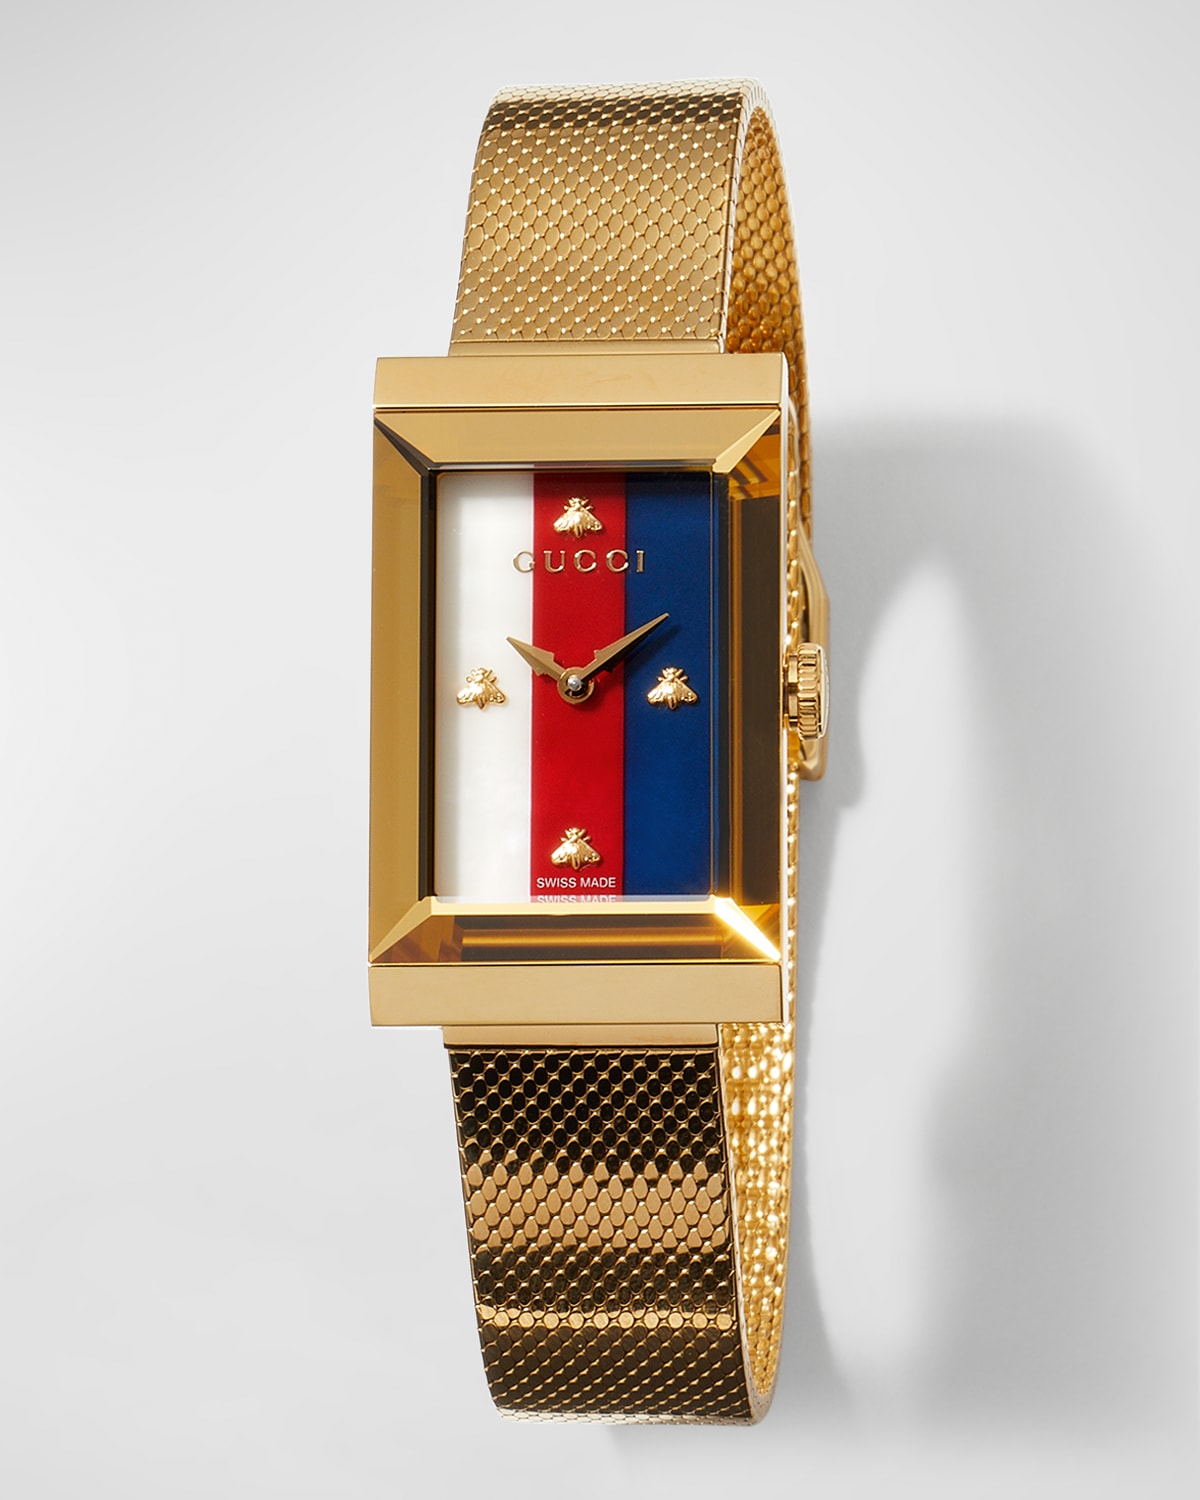 Gucci G-frame Rectangular Mother-of-pearl Watch W/ Mesh Strap, Gold